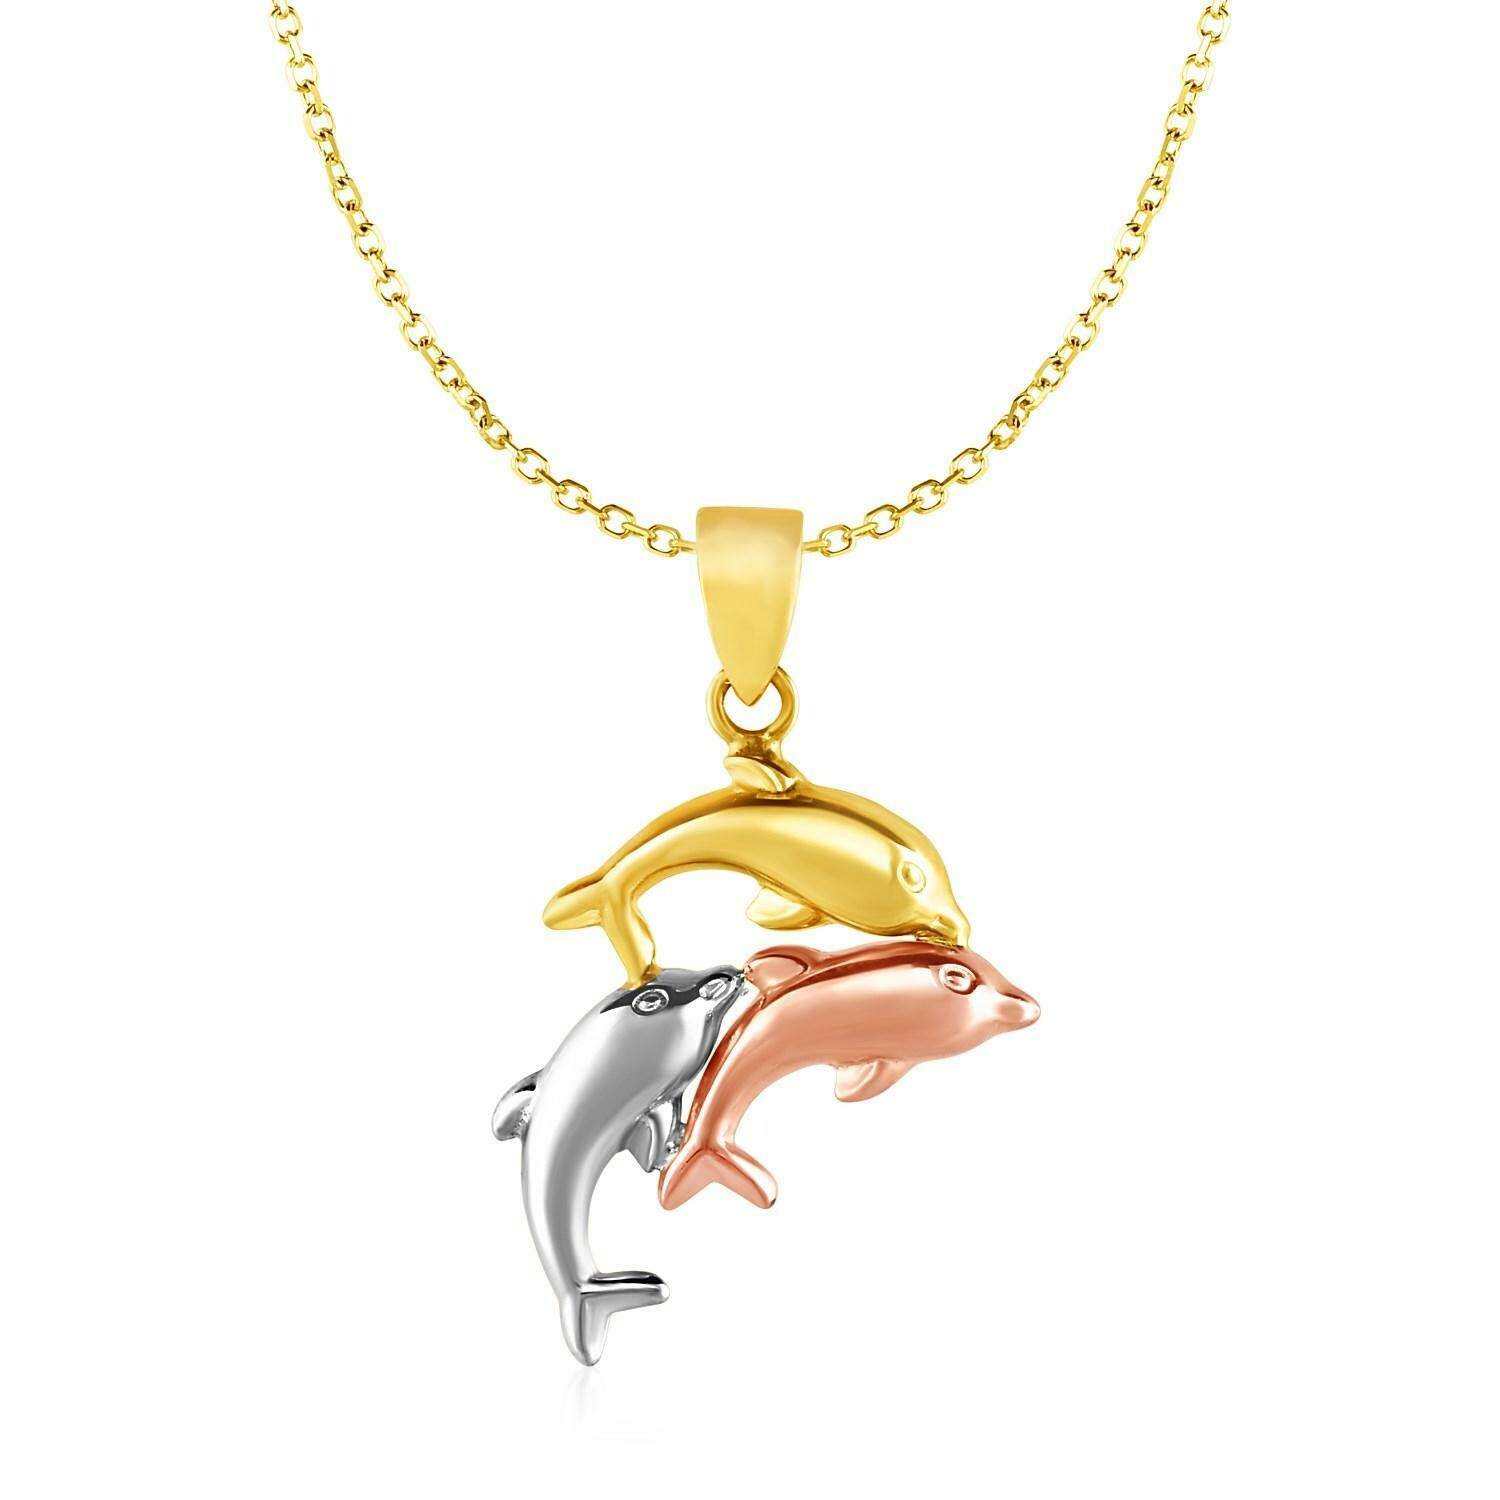 Pendant with Three Dolphins in 10k Tri Color Gold, Size: 18